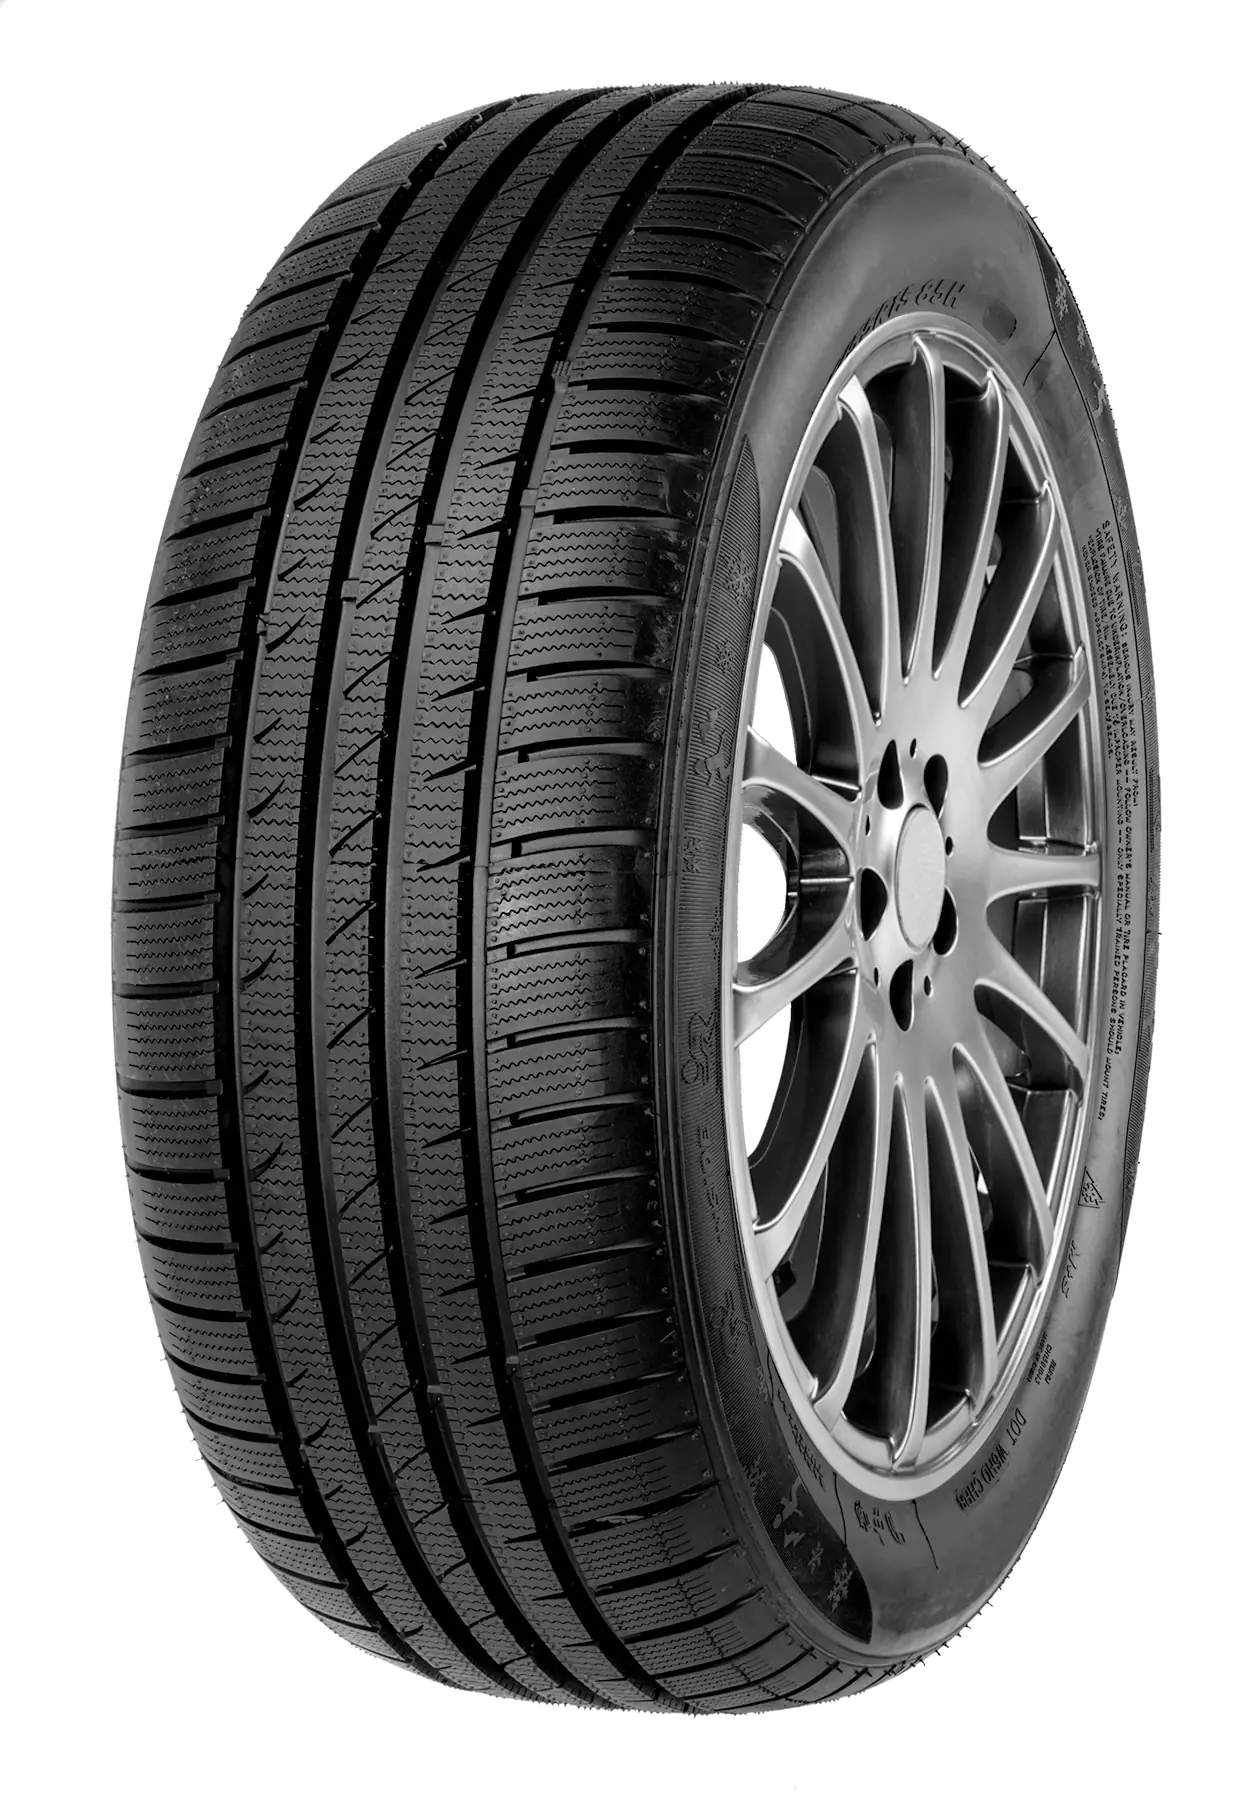 Gomme Autovettura Atlas 195/55 R16 87H POLARBEAR UHP M+S Invernale